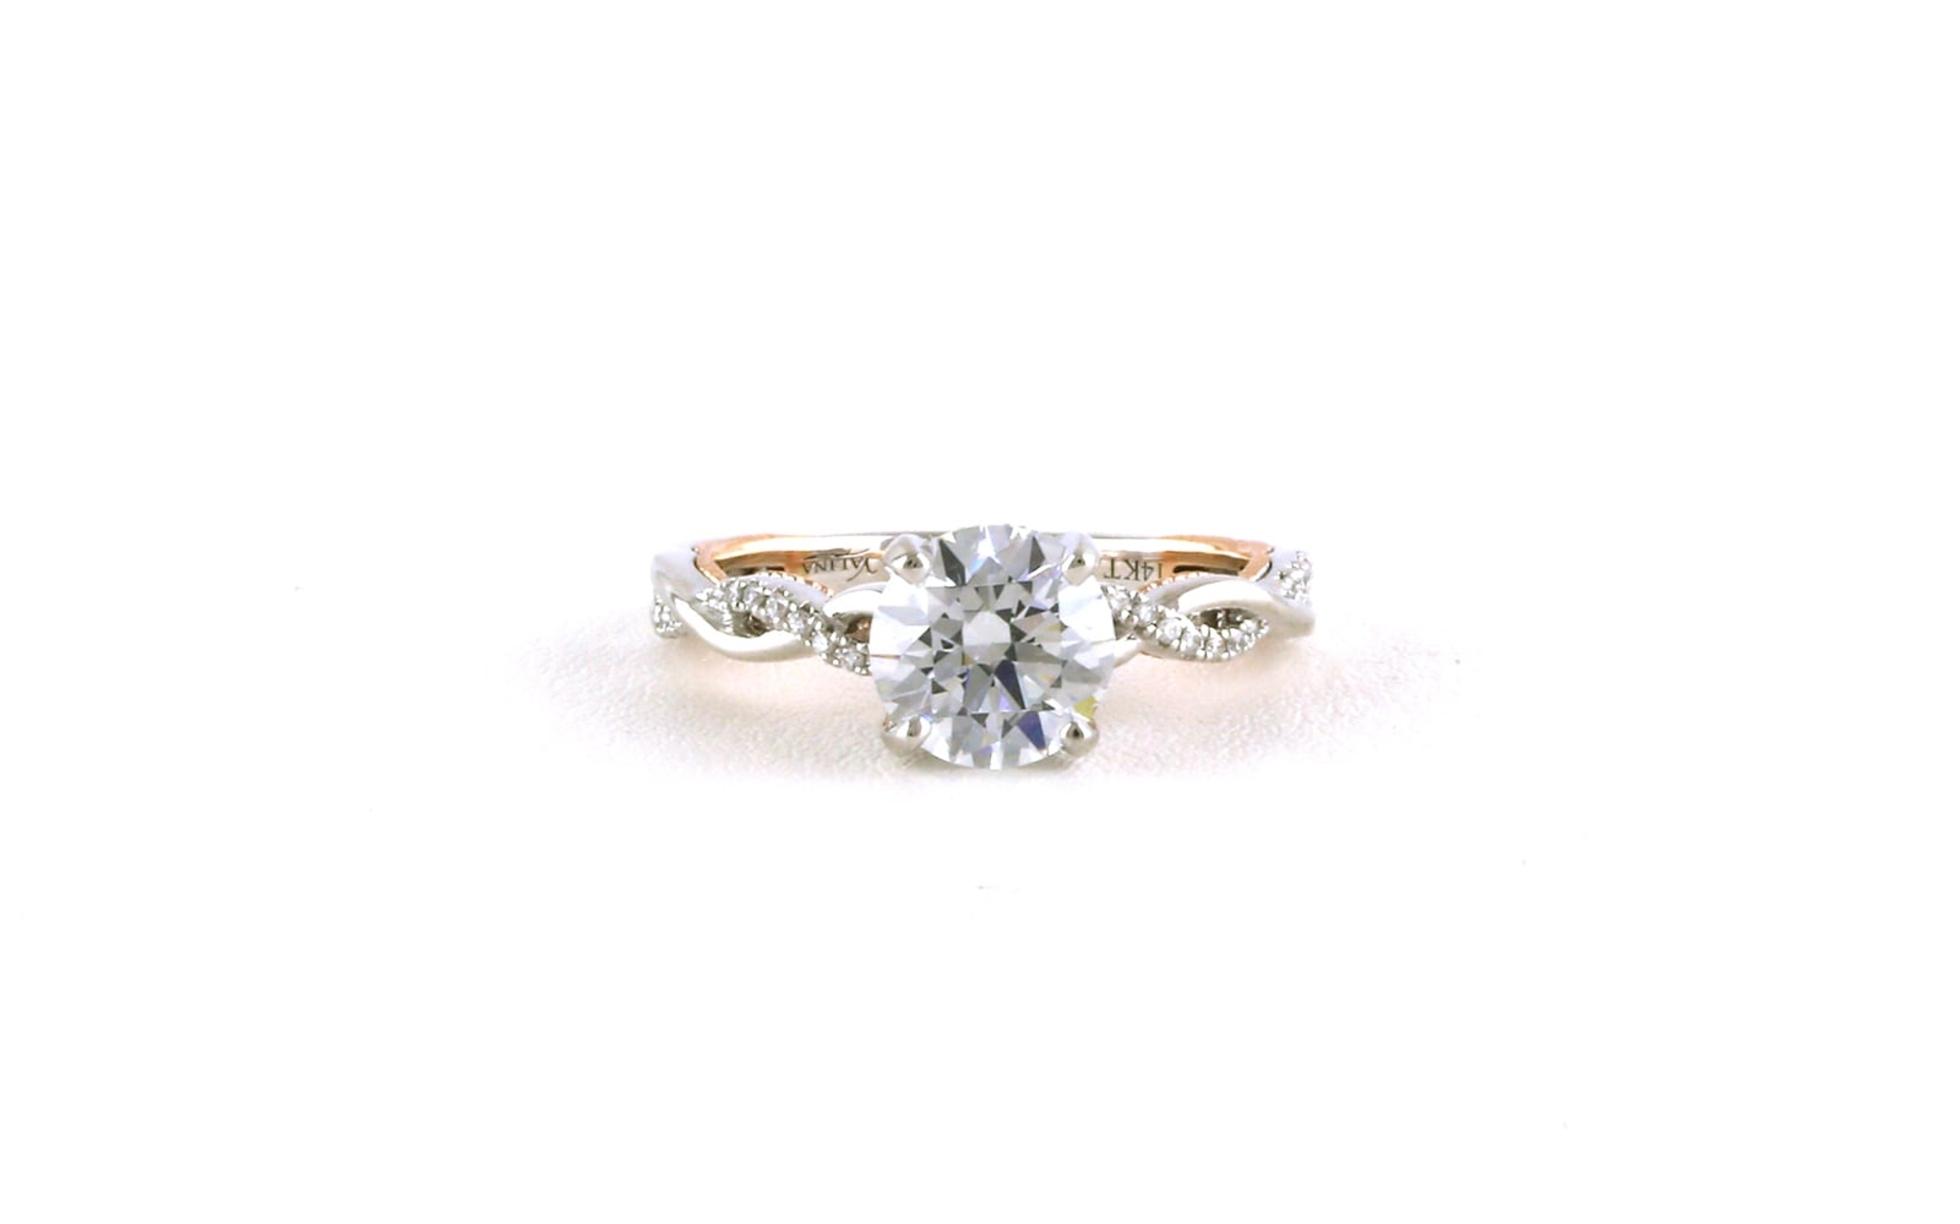 Solitaire-style Cubic Zirconium Ring with Twisted-style Band and Hidden Halo in White Gold (0.25cts TWT)